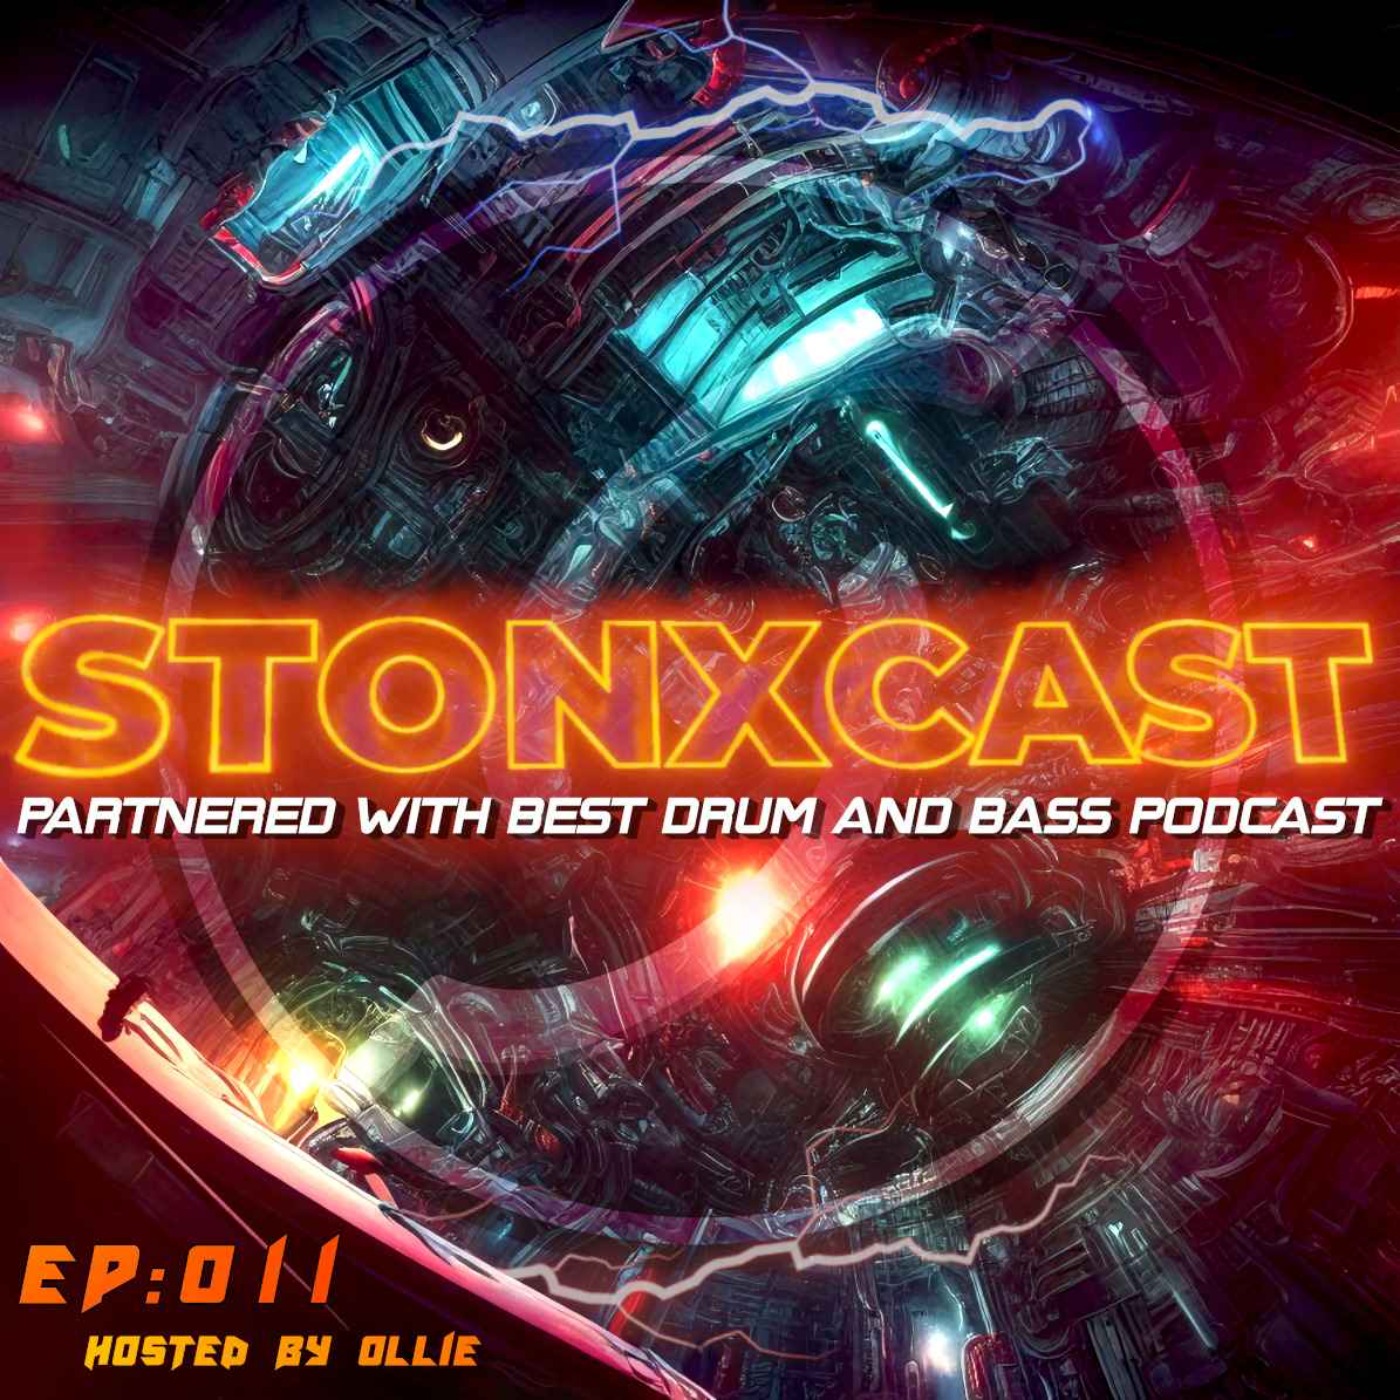 Stonxcast EP:011 - Hosted by Ollie Artwork